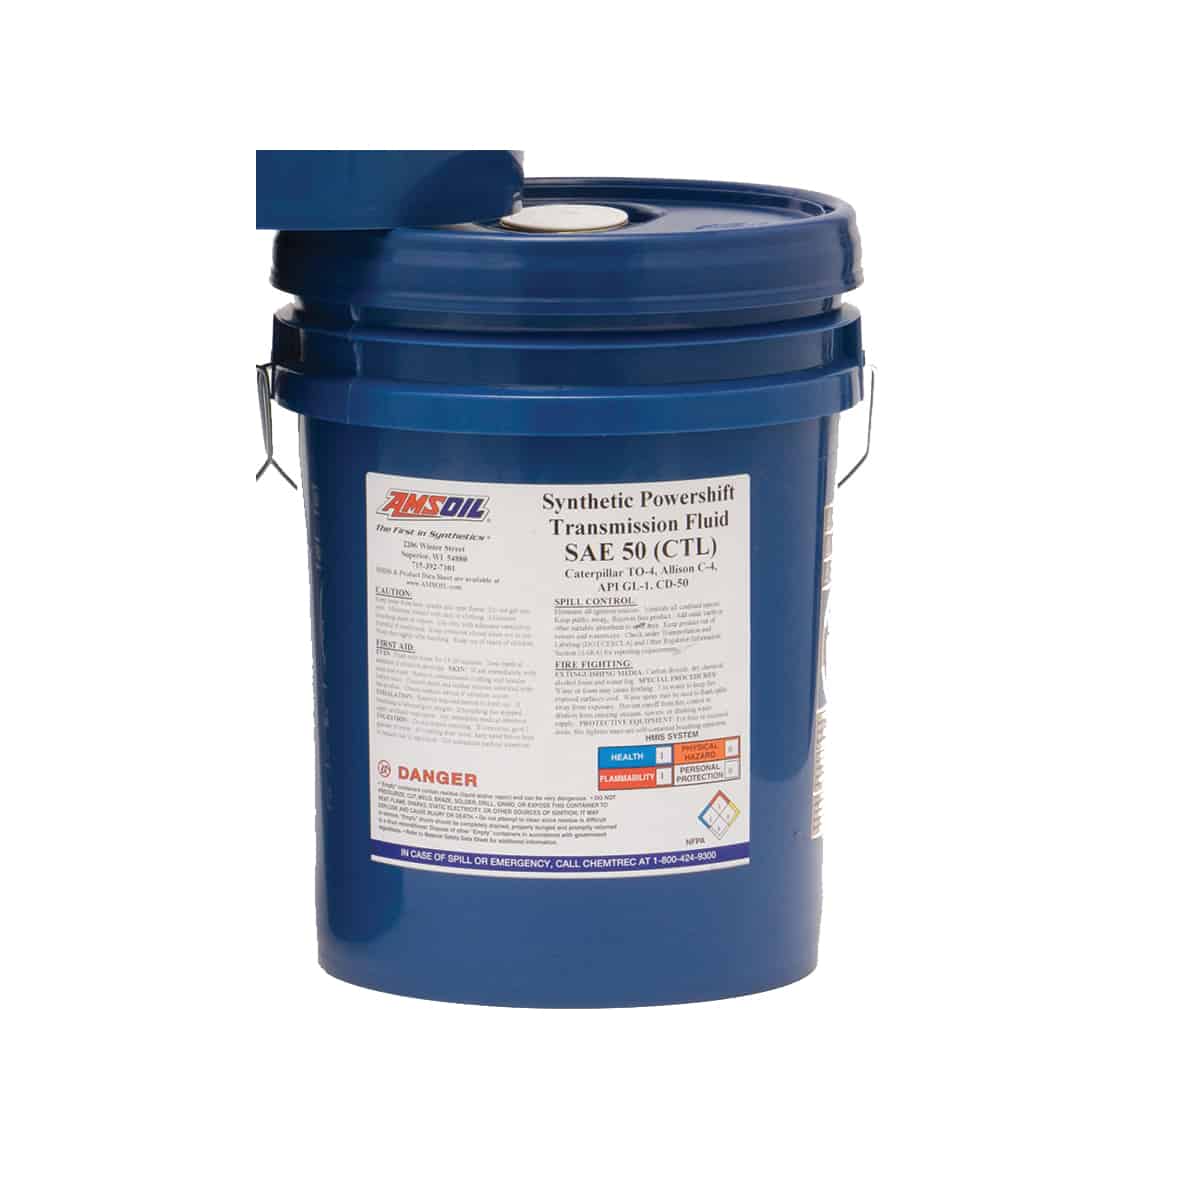 A pail of Synthetic Powershift Transmission Fluid, formulated for high-torque, heavy-duty powershift transmissions, for extended drain intervals.